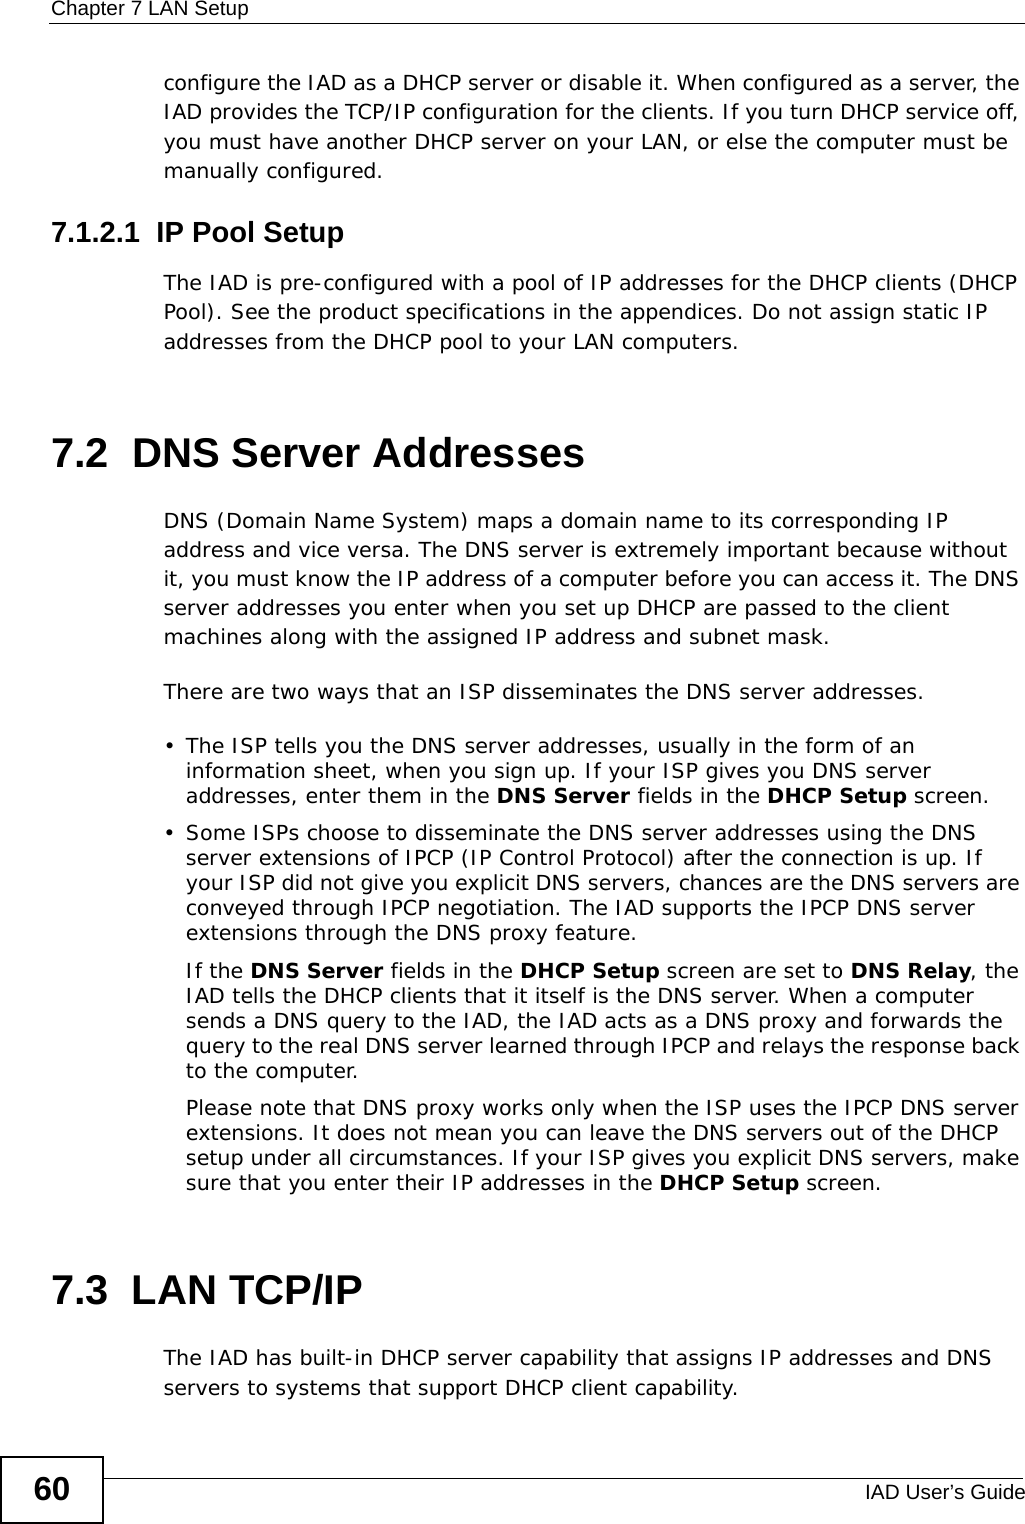 Chapter 7 LAN SetupIAD User’s Guide60configure the IAD as a DHCP server or disable it. When configured as a server, the IAD provides the TCP/IP configuration for the clients. If you turn DHCP service off, you must have another DHCP server on your LAN, or else the computer must be manually configured. 7.1.2.1  IP Pool SetupThe IAD is pre-configured with a pool of IP addresses for the DHCP clients (DHCP Pool). See the product specifications in the appendices. Do not assign static IP addresses from the DHCP pool to your LAN computers.7.2  DNS Server Addresses DNS (Domain Name System) maps a domain name to its corresponding IP address and vice versa. The DNS server is extremely important because without it, you must know the IP address of a computer before you can access it. The DNS server addresses you enter when you set up DHCP are passed to the client machines along with the assigned IP address and subnet mask.There are two ways that an ISP disseminates the DNS server addresses. • The ISP tells you the DNS server addresses, usually in the form of an information sheet, when you sign up. If your ISP gives you DNS server addresses, enter them in the DNS Server fields in the DHCP Setup screen.• Some ISPs choose to disseminate the DNS server addresses using the DNS server extensions of IPCP (IP Control Protocol) after the connection is up. If your ISP did not give you explicit DNS servers, chances are the DNS servers are conveyed through IPCP negotiation. The IAD supports the IPCP DNS server extensions through the DNS proxy feature.If the DNS Server fields in the DHCP Setup screen are set to DNS Relay, the IAD tells the DHCP clients that it itself is the DNS server. When a computer sends a DNS query to the IAD, the IAD acts as a DNS proxy and forwards the query to the real DNS server learned through IPCP and relays the response back to the computer.Please note that DNS proxy works only when the ISP uses the IPCP DNS server extensions. It does not mean you can leave the DNS servers out of the DHCP setup under all circumstances. If your ISP gives you explicit DNS servers, make sure that you enter their IP addresses in the DHCP Setup screen.7.3  LAN TCP/IP The IAD has built-in DHCP server capability that assigns IP addresses and DNS servers to systems that support DHCP client capability.